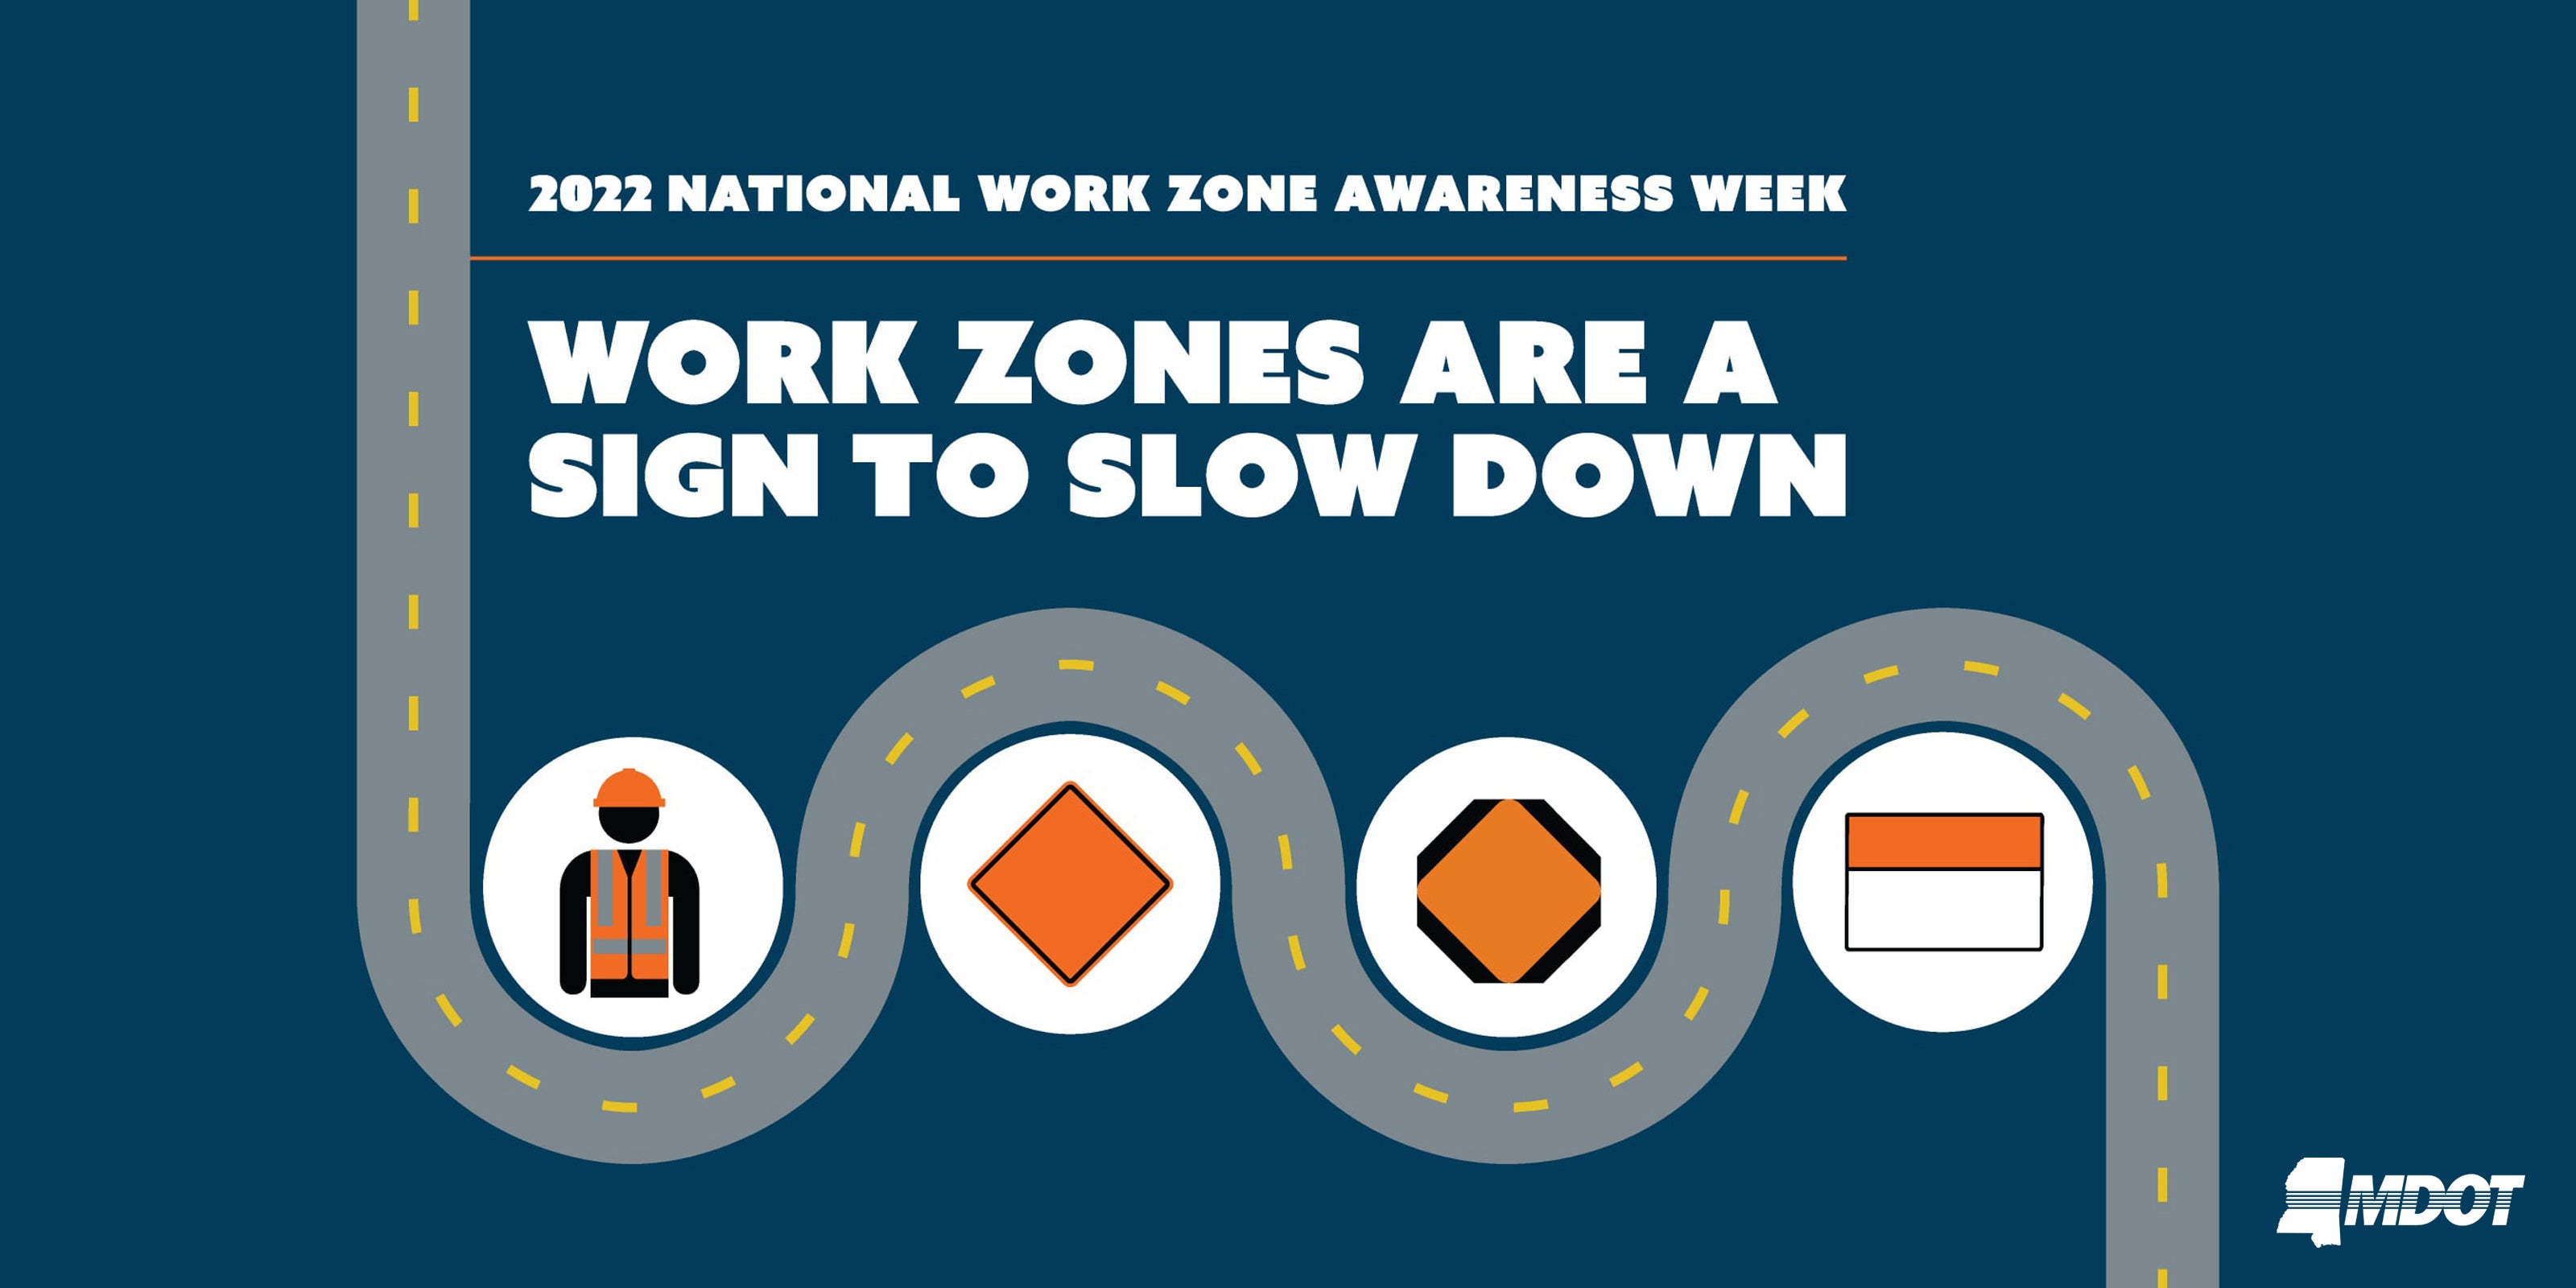 Work zones are temporary, actions behind the wheel can be permanent